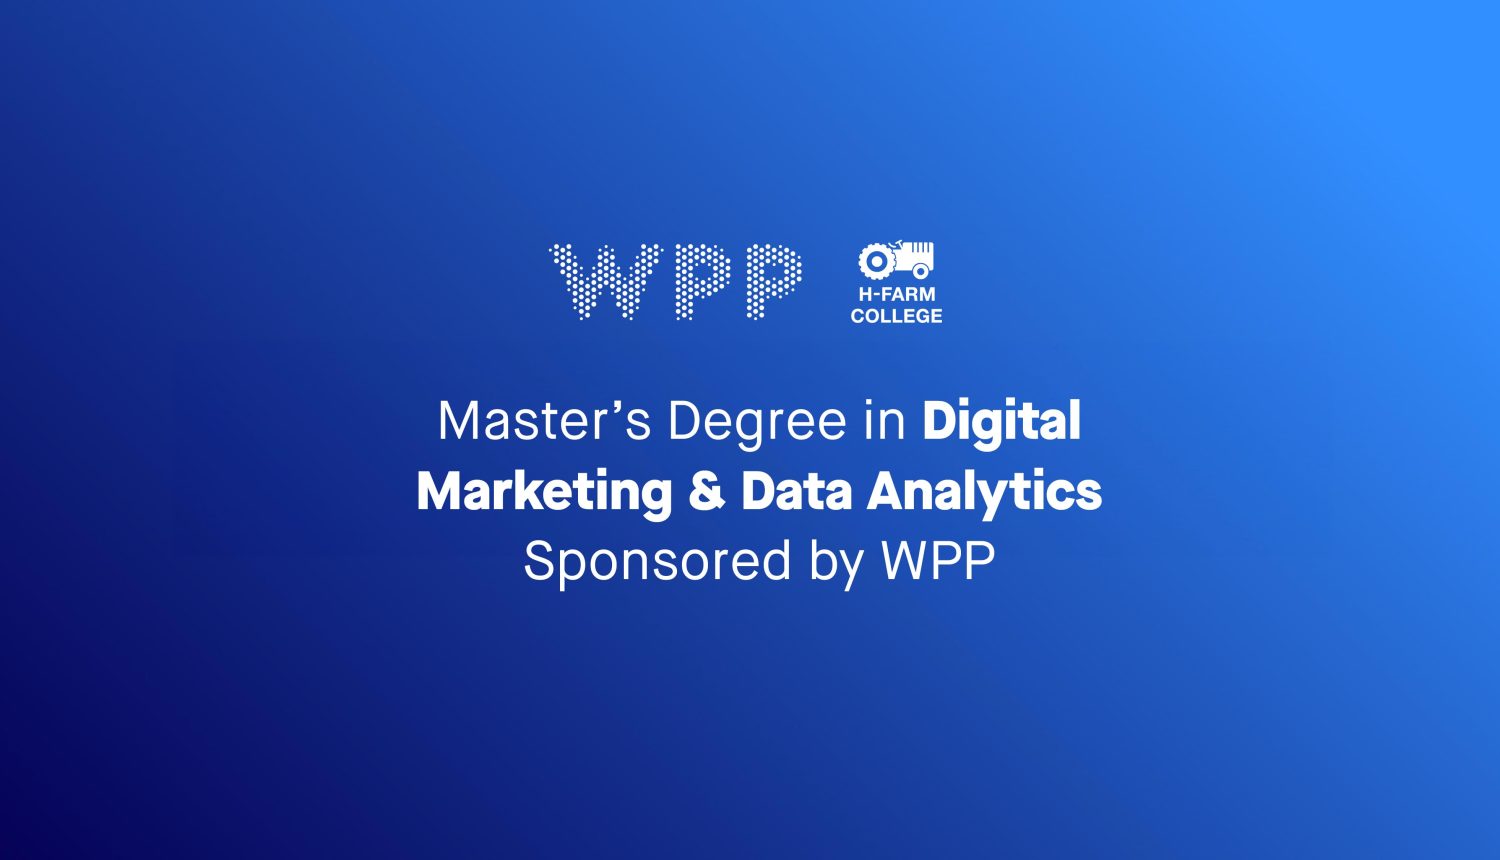 WPP is the unique sponsor of the Master’s Degree in Digital Marketing & Data Analytics